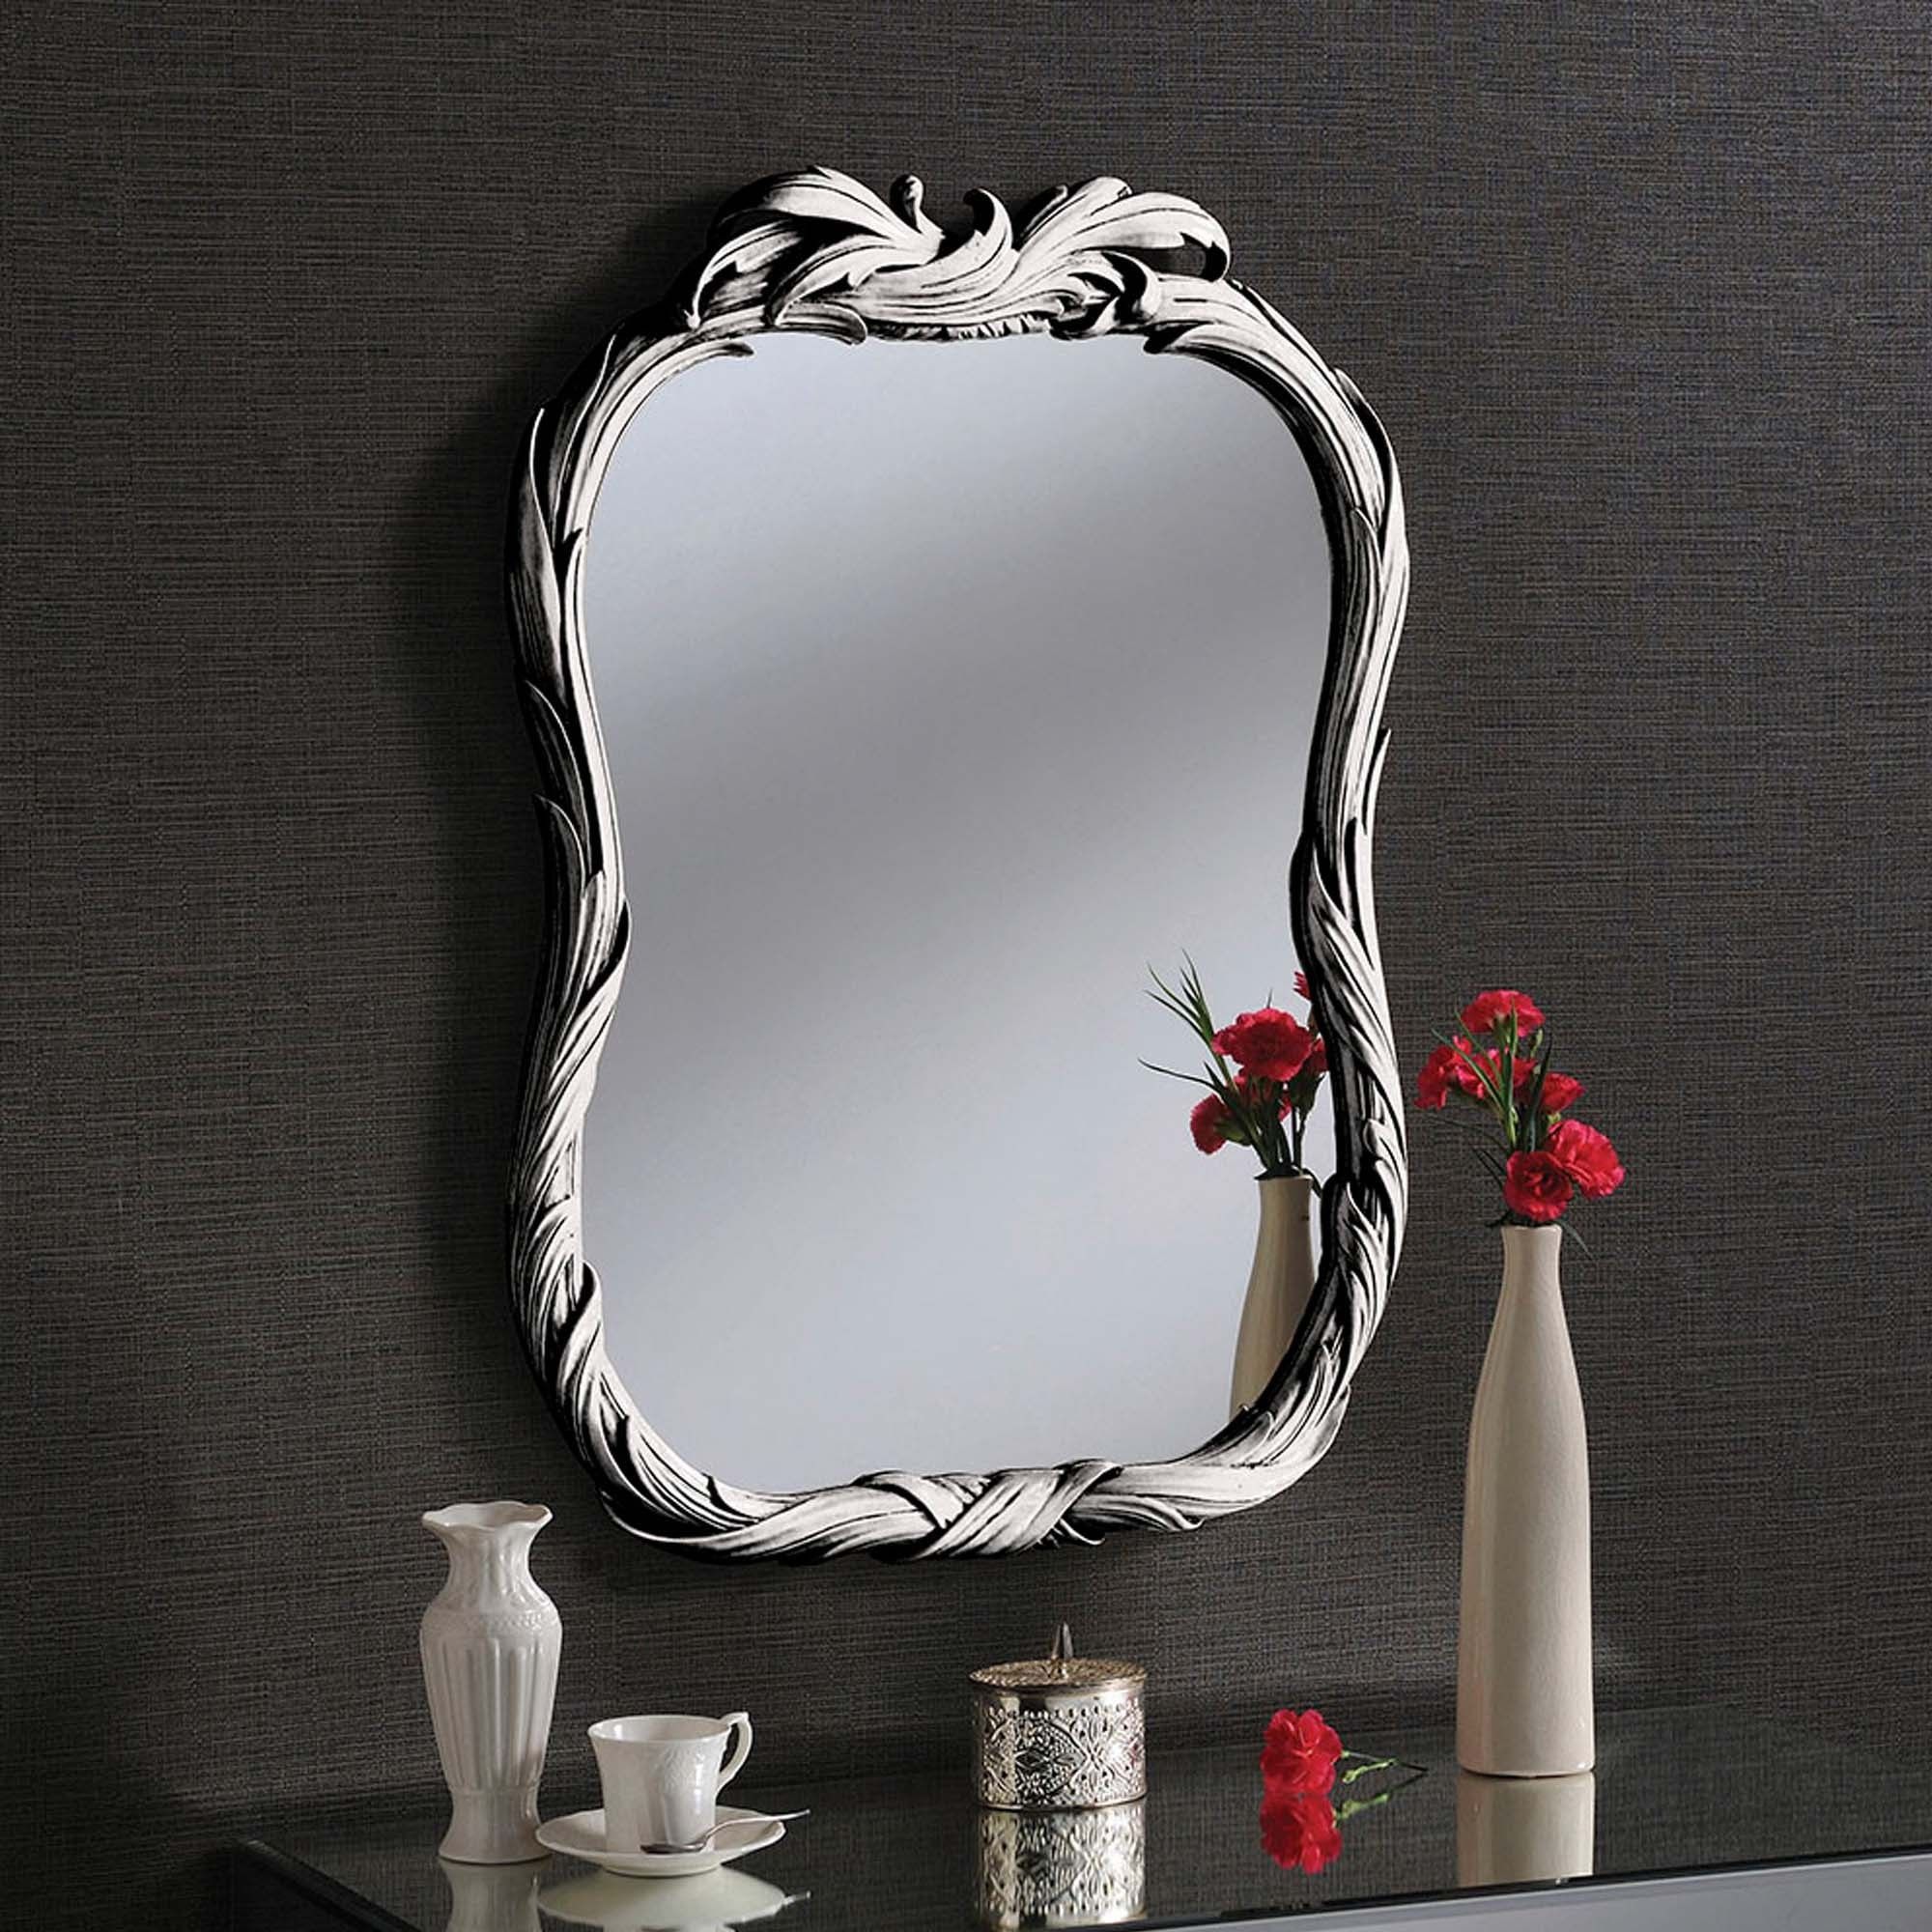 Decorative Silver Ornate Oval Wall Mirror | Silver Oval Wall Mirror Regarding Accent Mirrors (View 15 of 15)